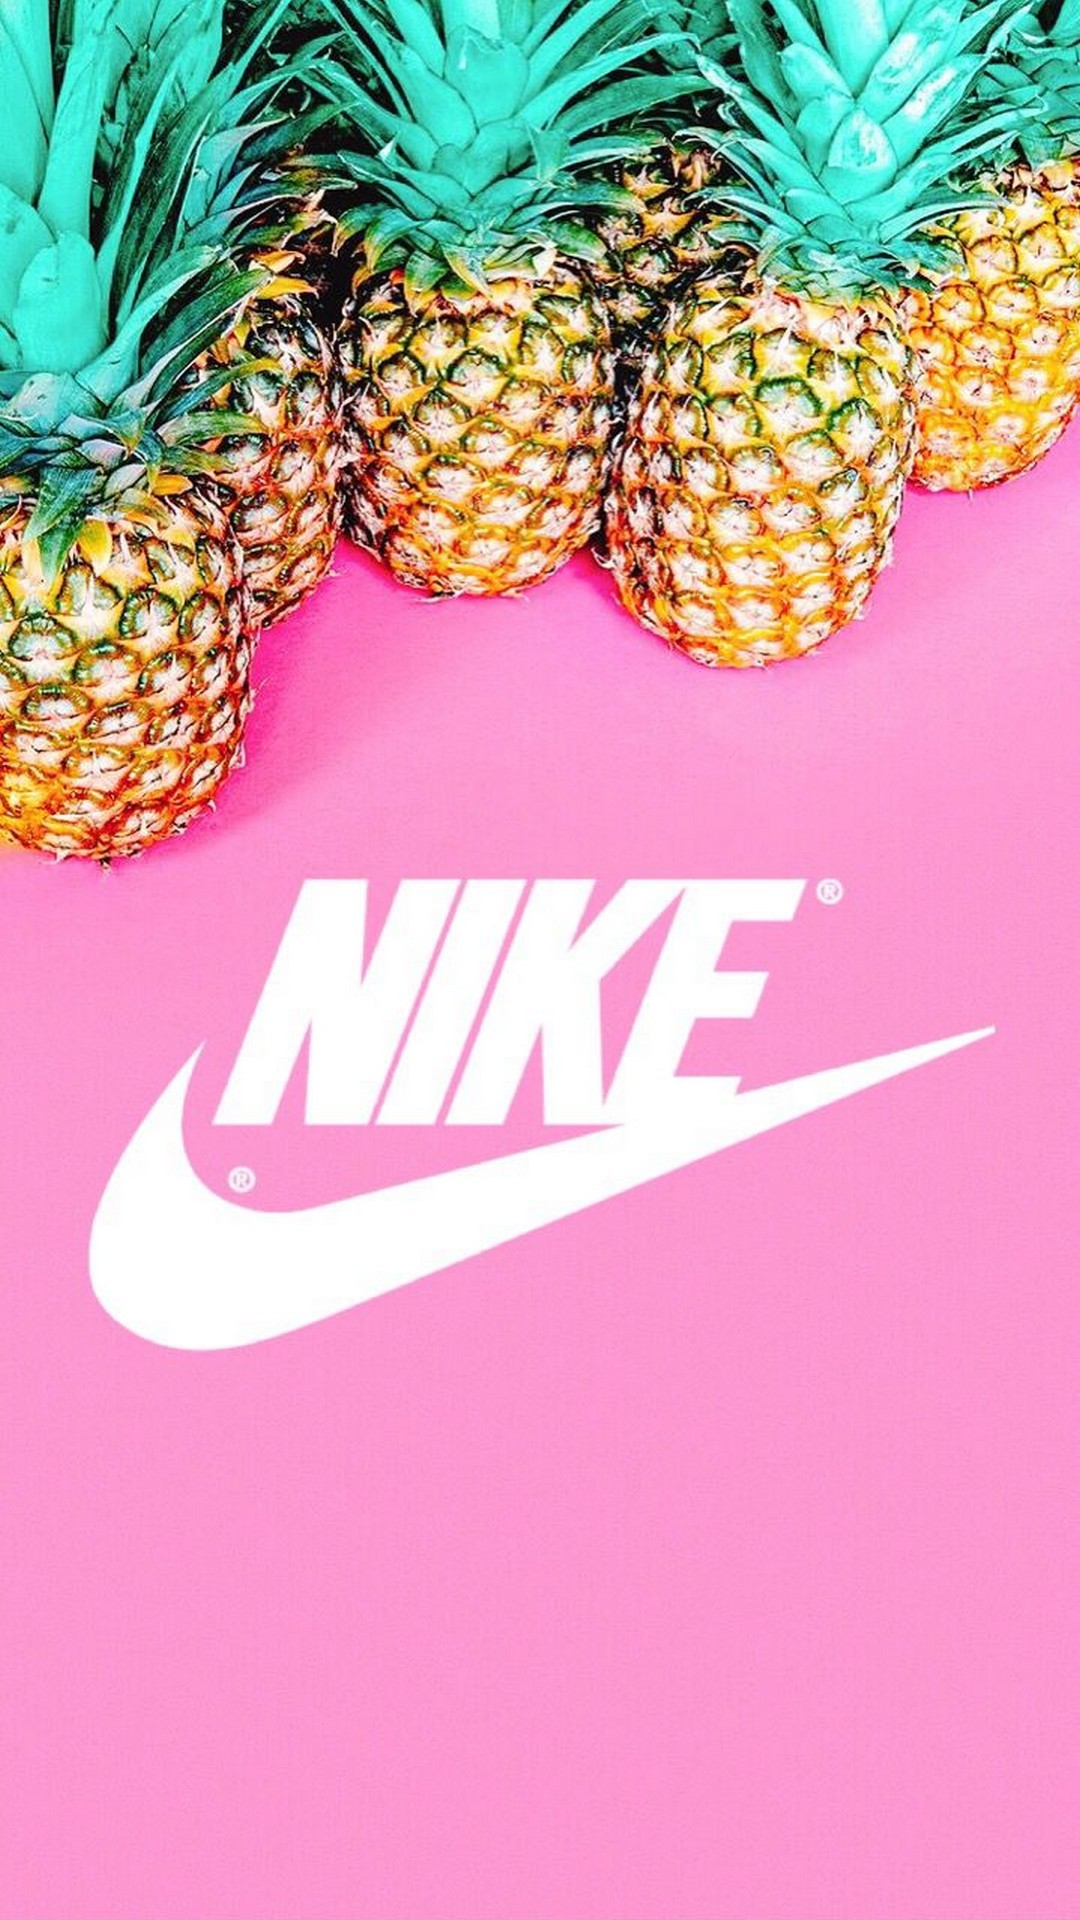 Pink Nike Wallpaper Android with HD resolution 1080x1920